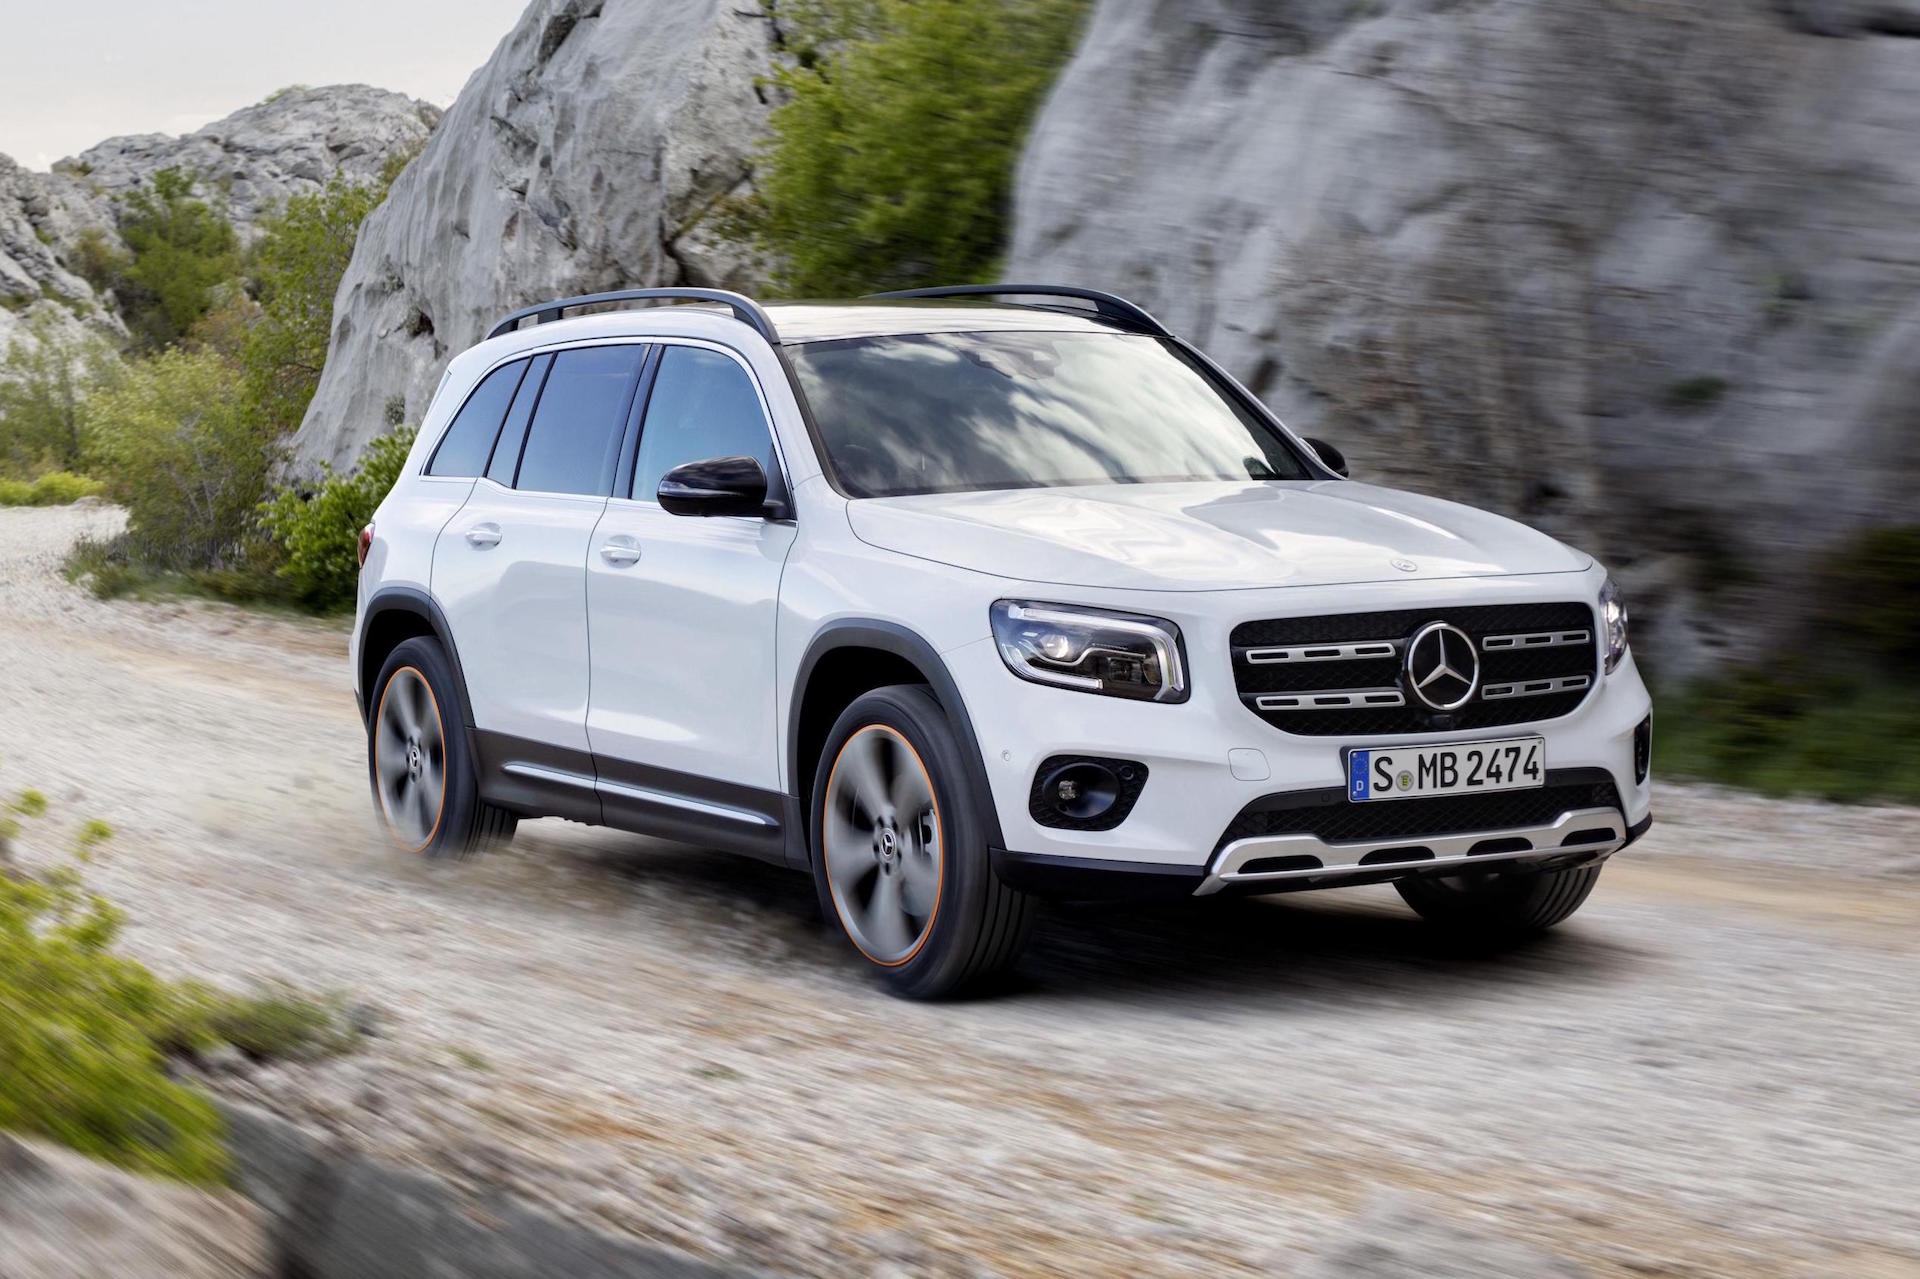 2020 Mercedes-Benz GLB revealed as new 7-seat compact SUV